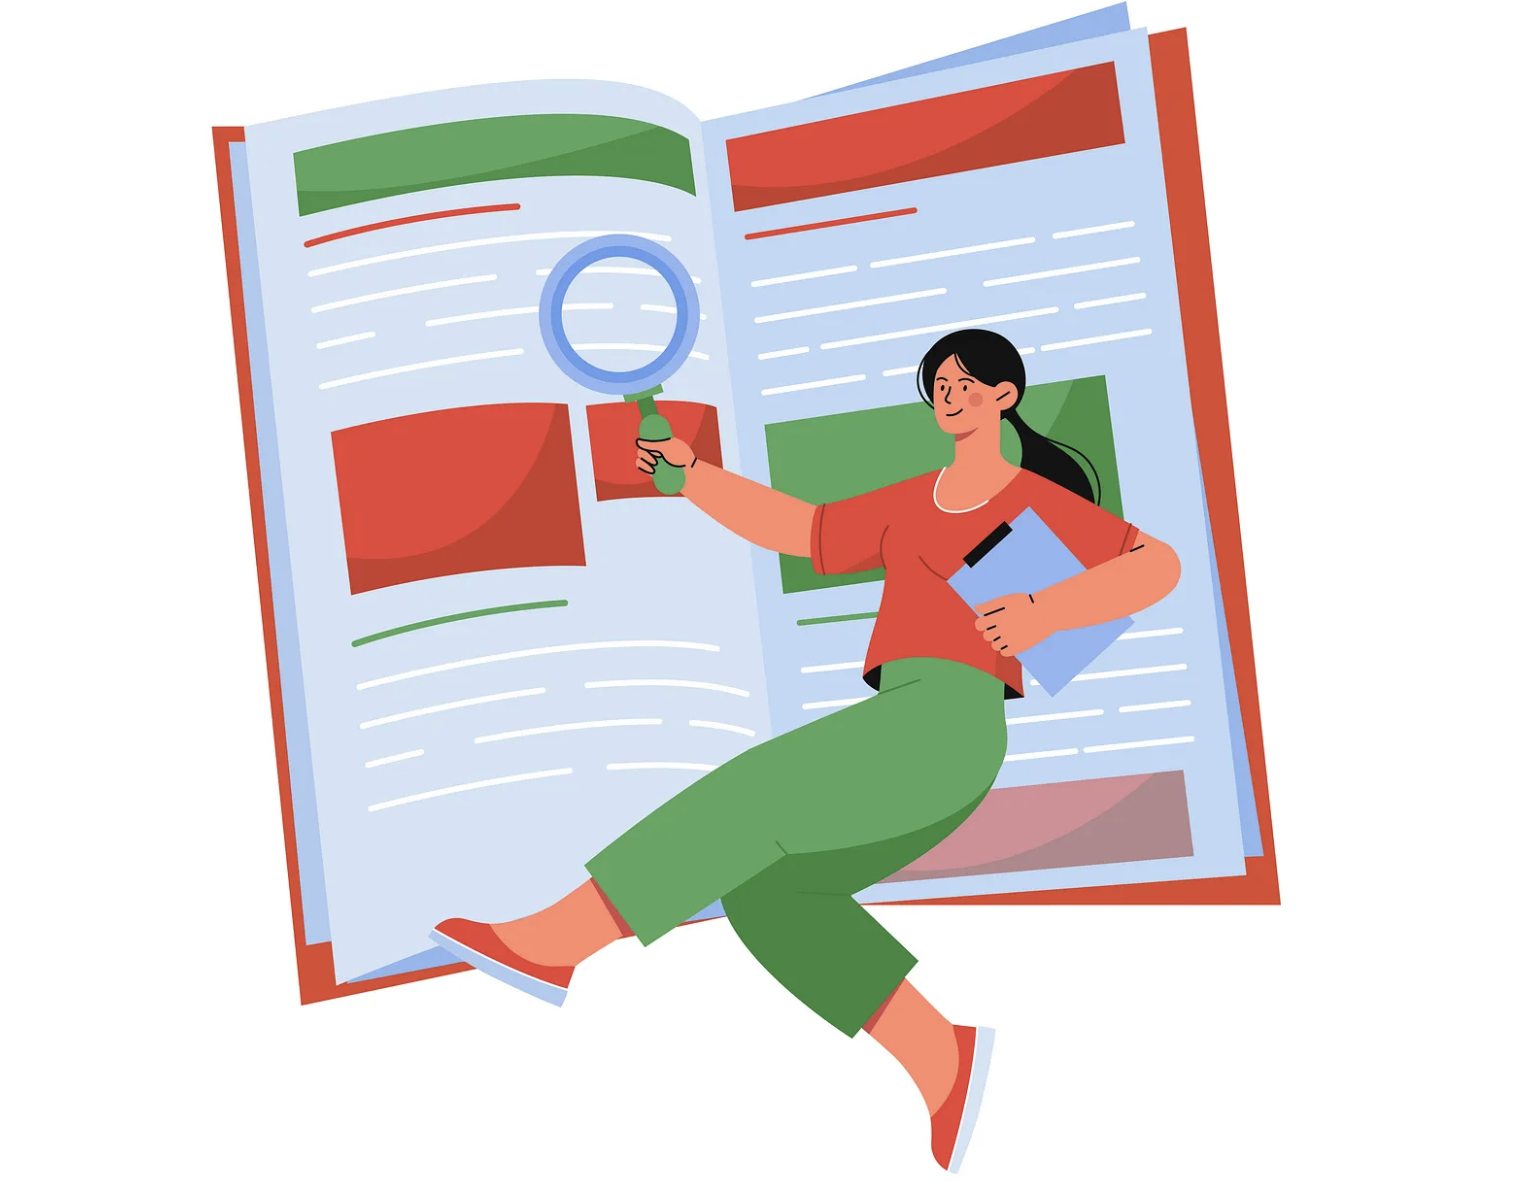 An illustration of a woman holding a magnifying glass looking at a book.